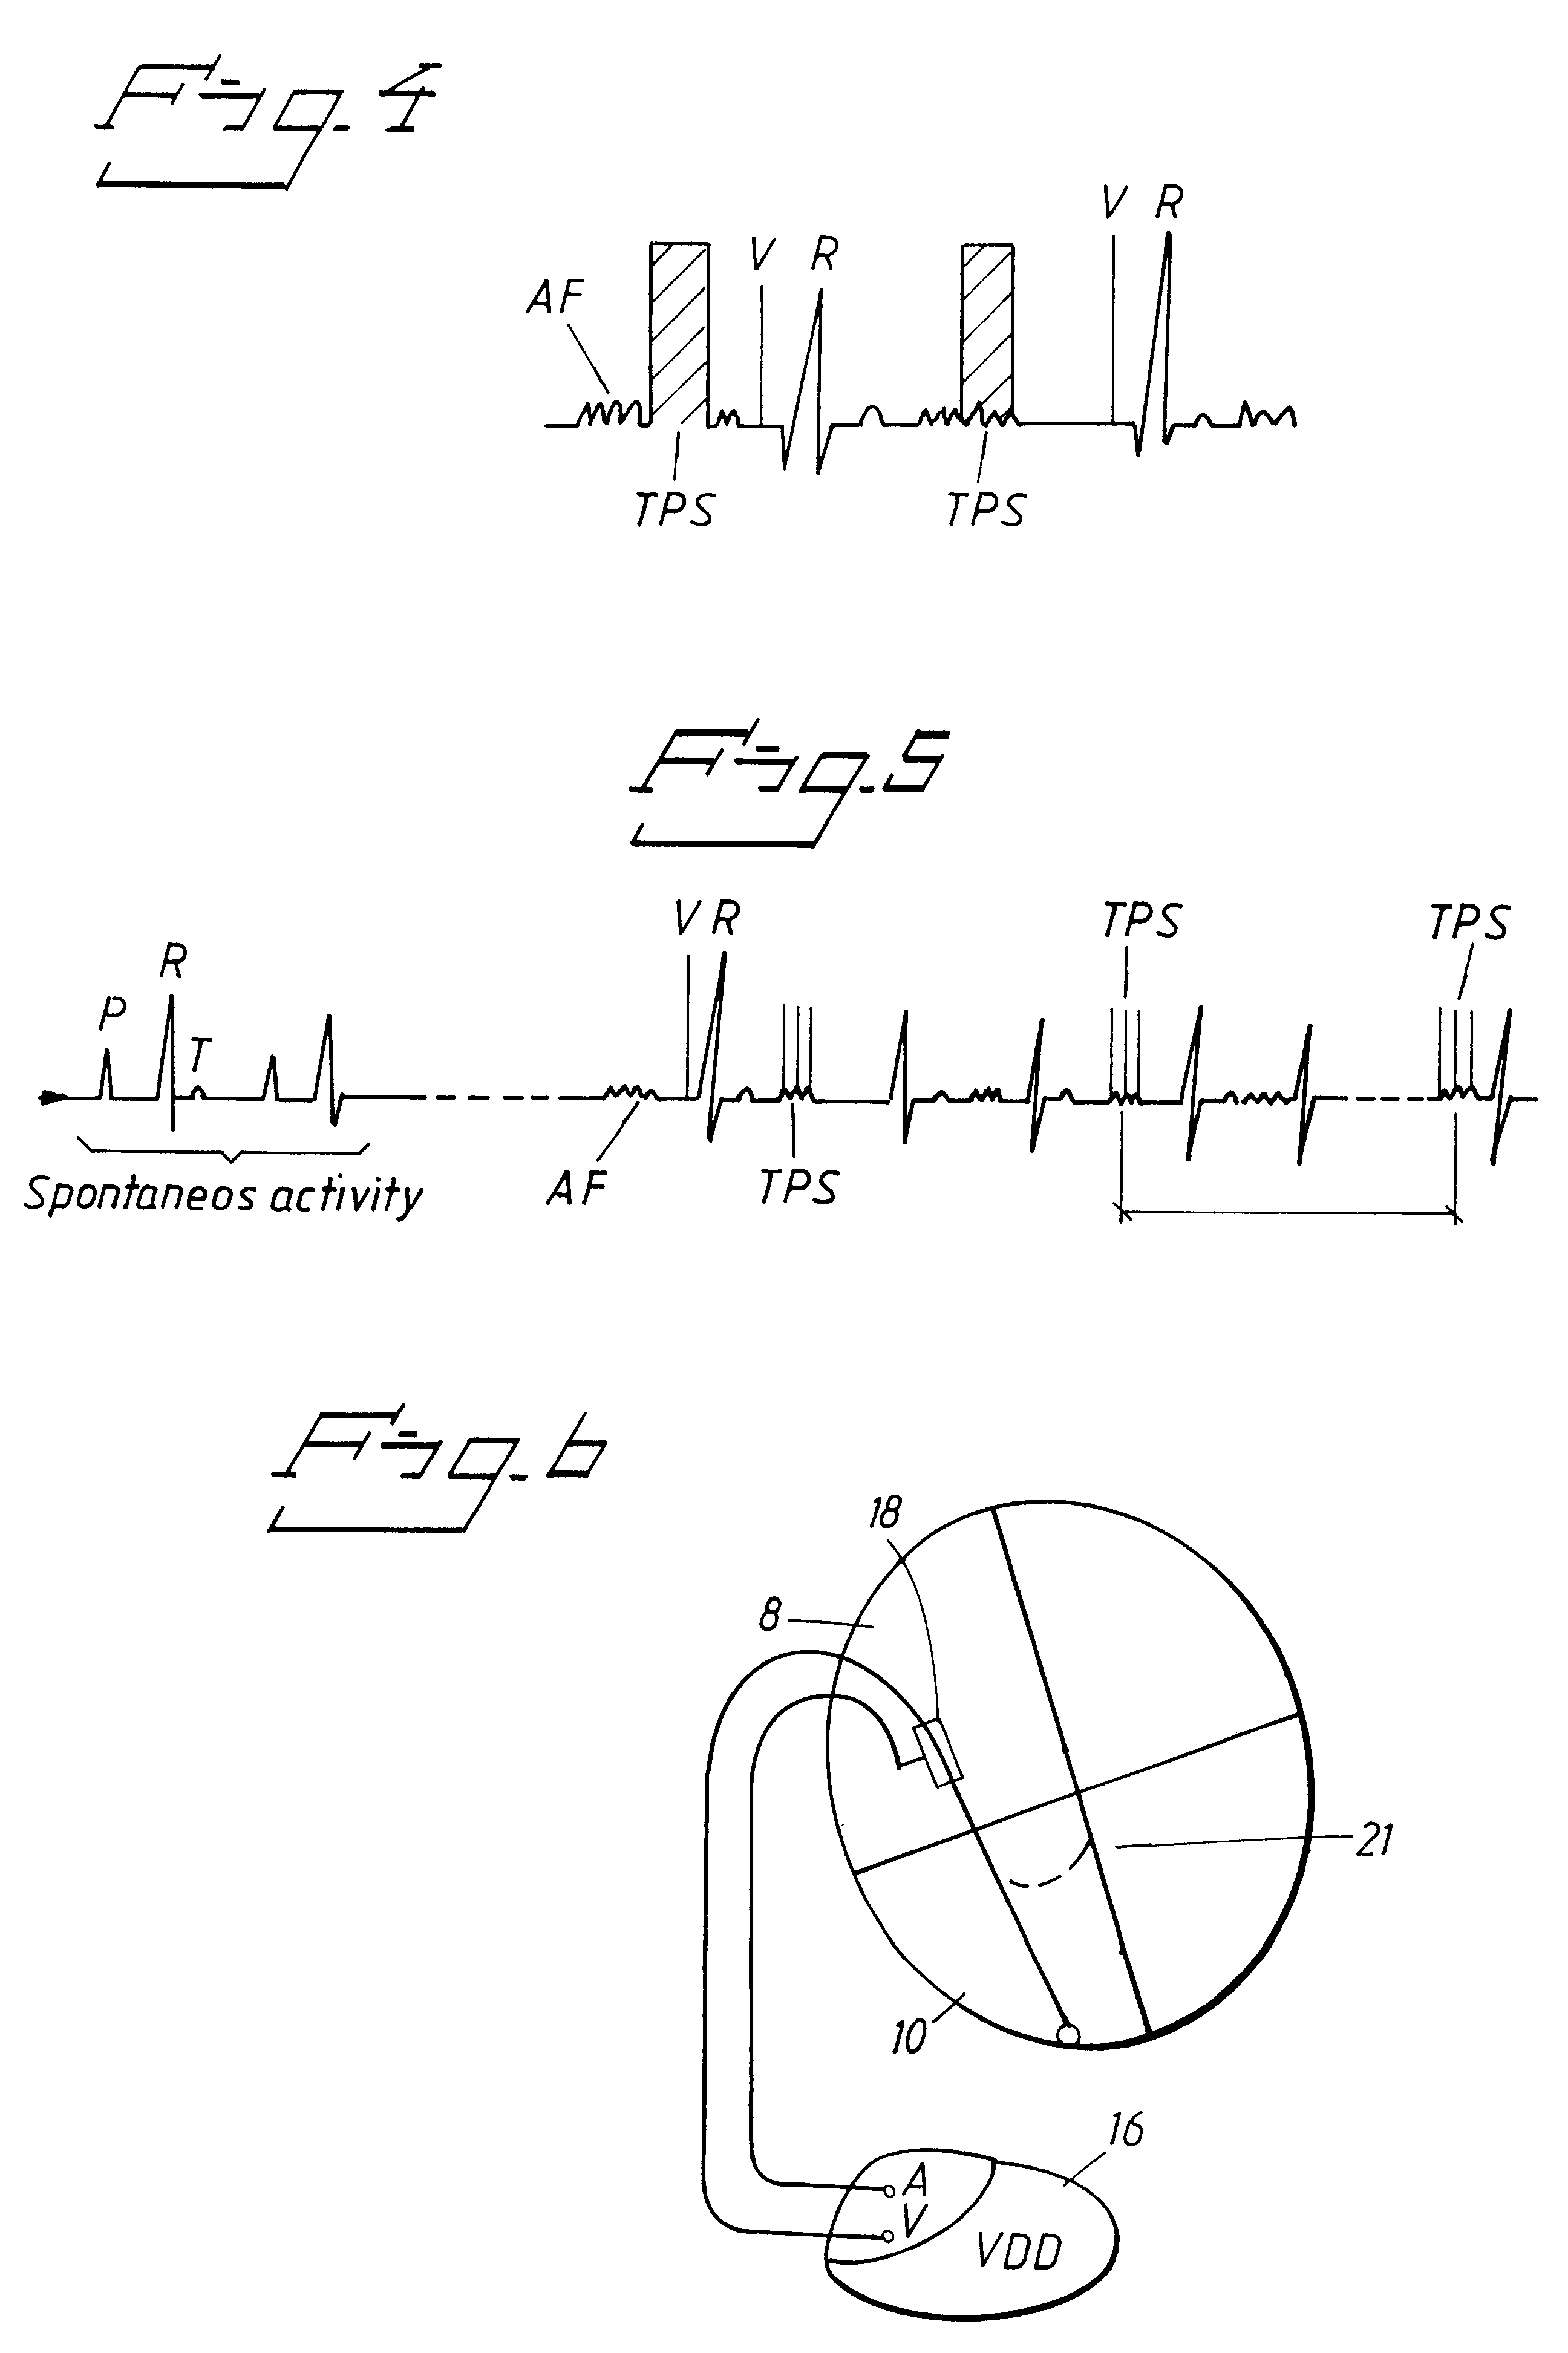 Heart stimulator for administering antithrombus therapy